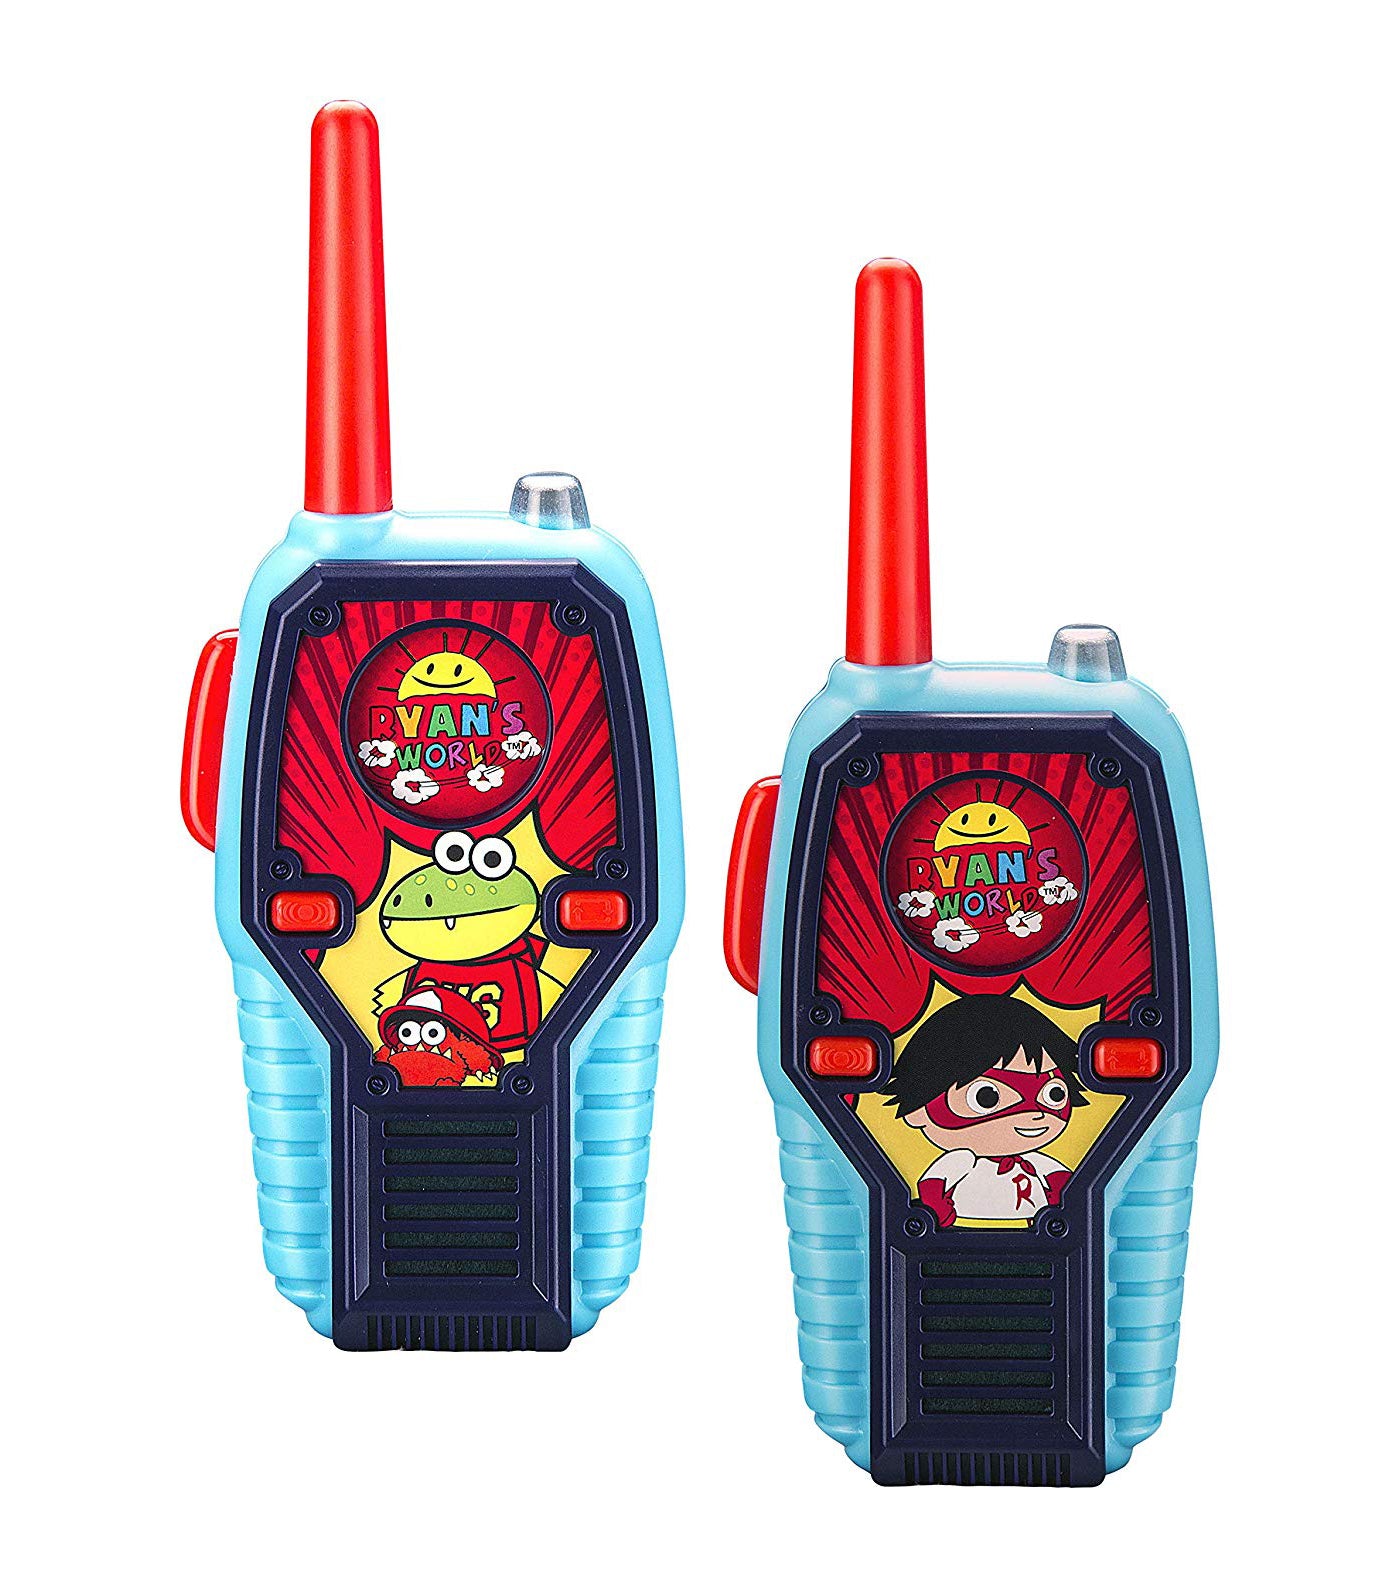 ryan's world deluxe walkie talkies with lights and sounds